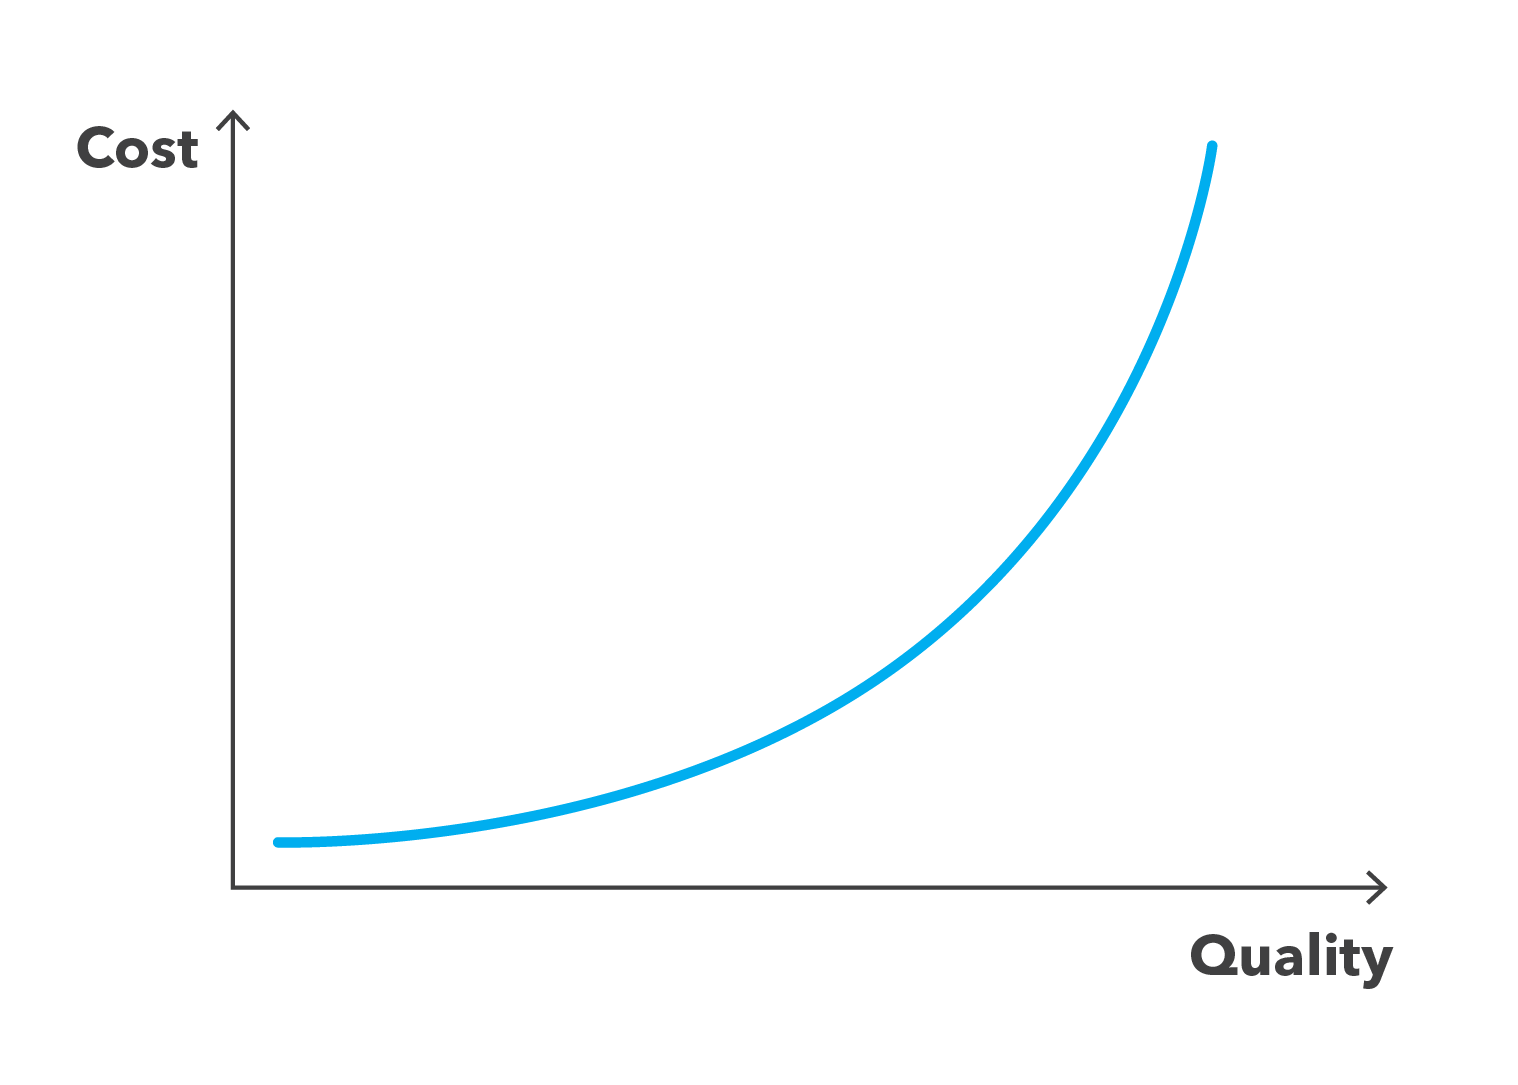 Graph showing exponential curve with quality on x axis and cost on y axis